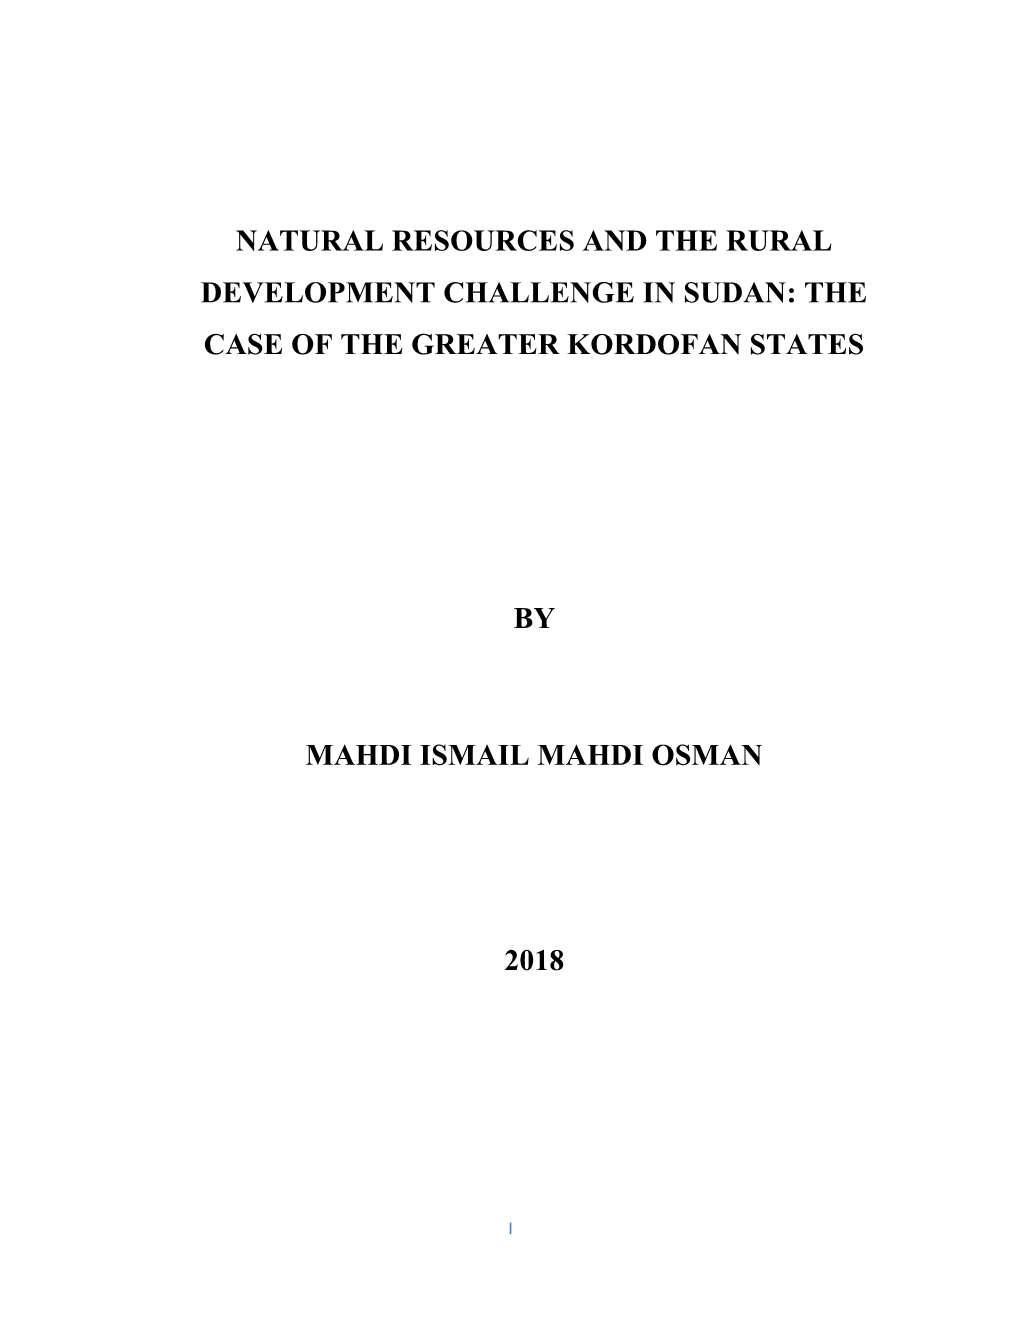 Natural Resources and the Rural Development Challenge in Sudan: the Case of the Greater Kordofan States